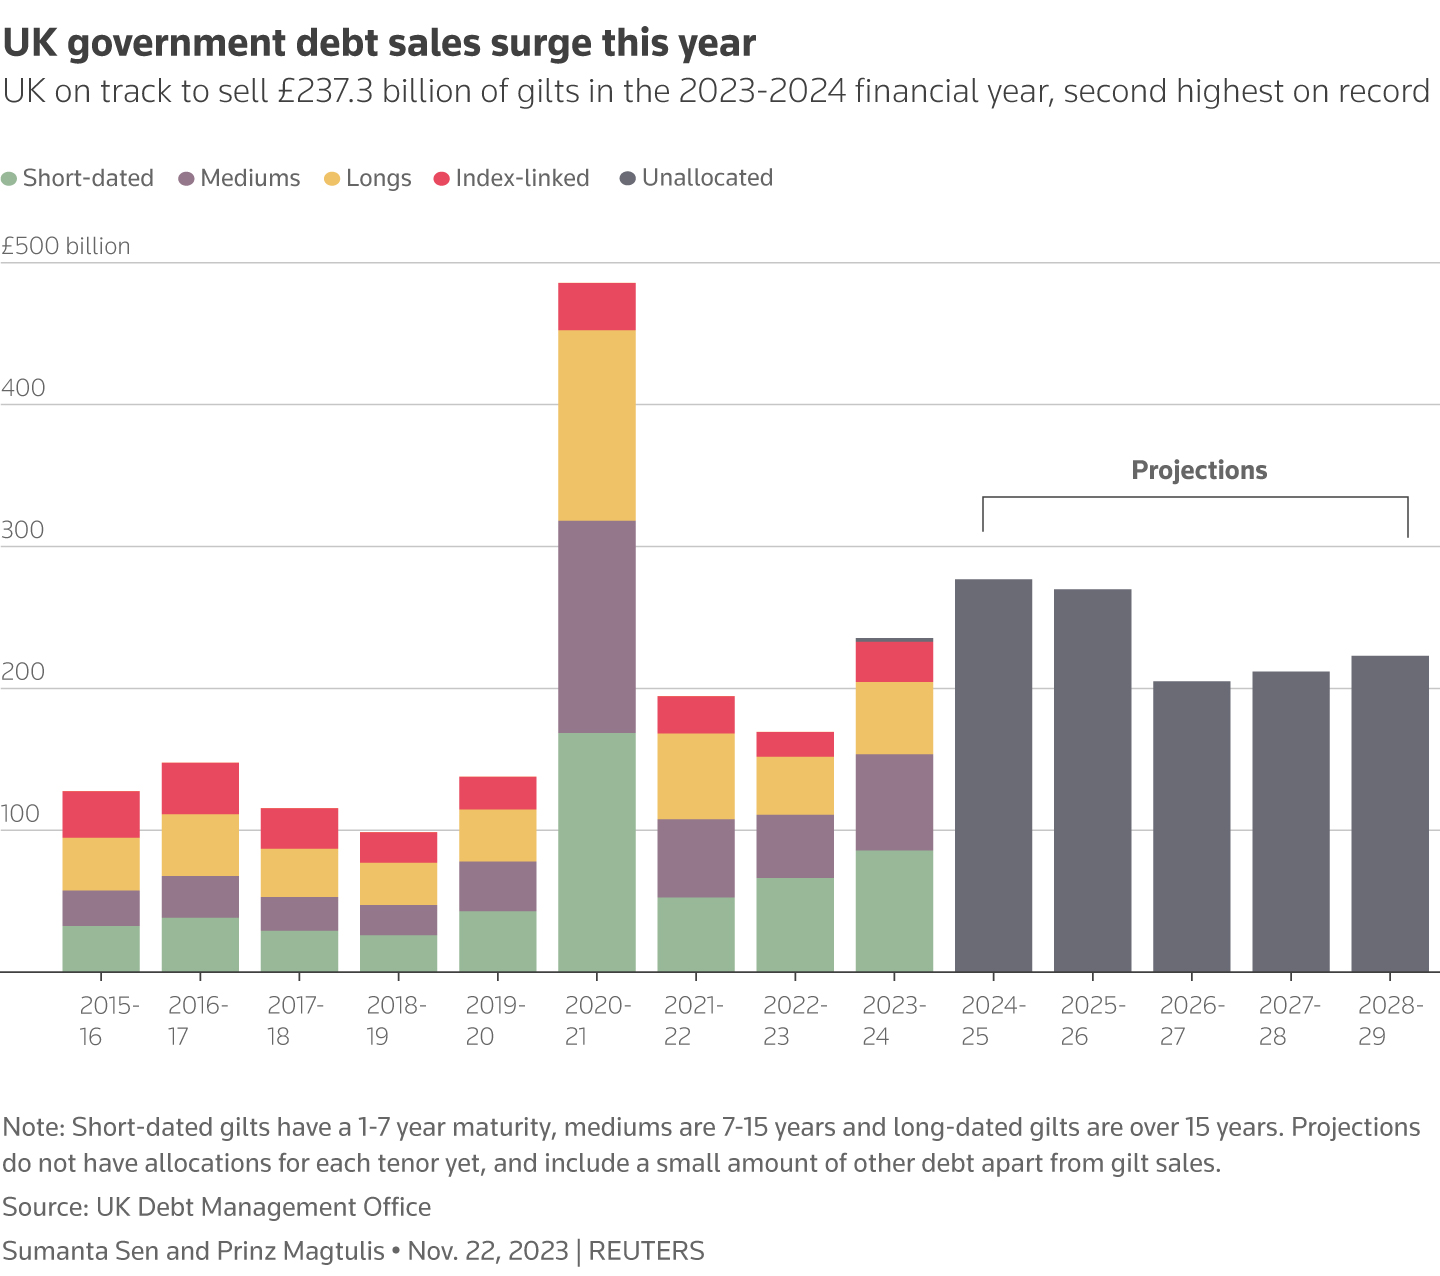 Bar chart with data from UK Debt Management Office show the UK government's actual gilt issuances from financial year 2015-2016 to 2023-2024 and projections from 2025 to 2029.